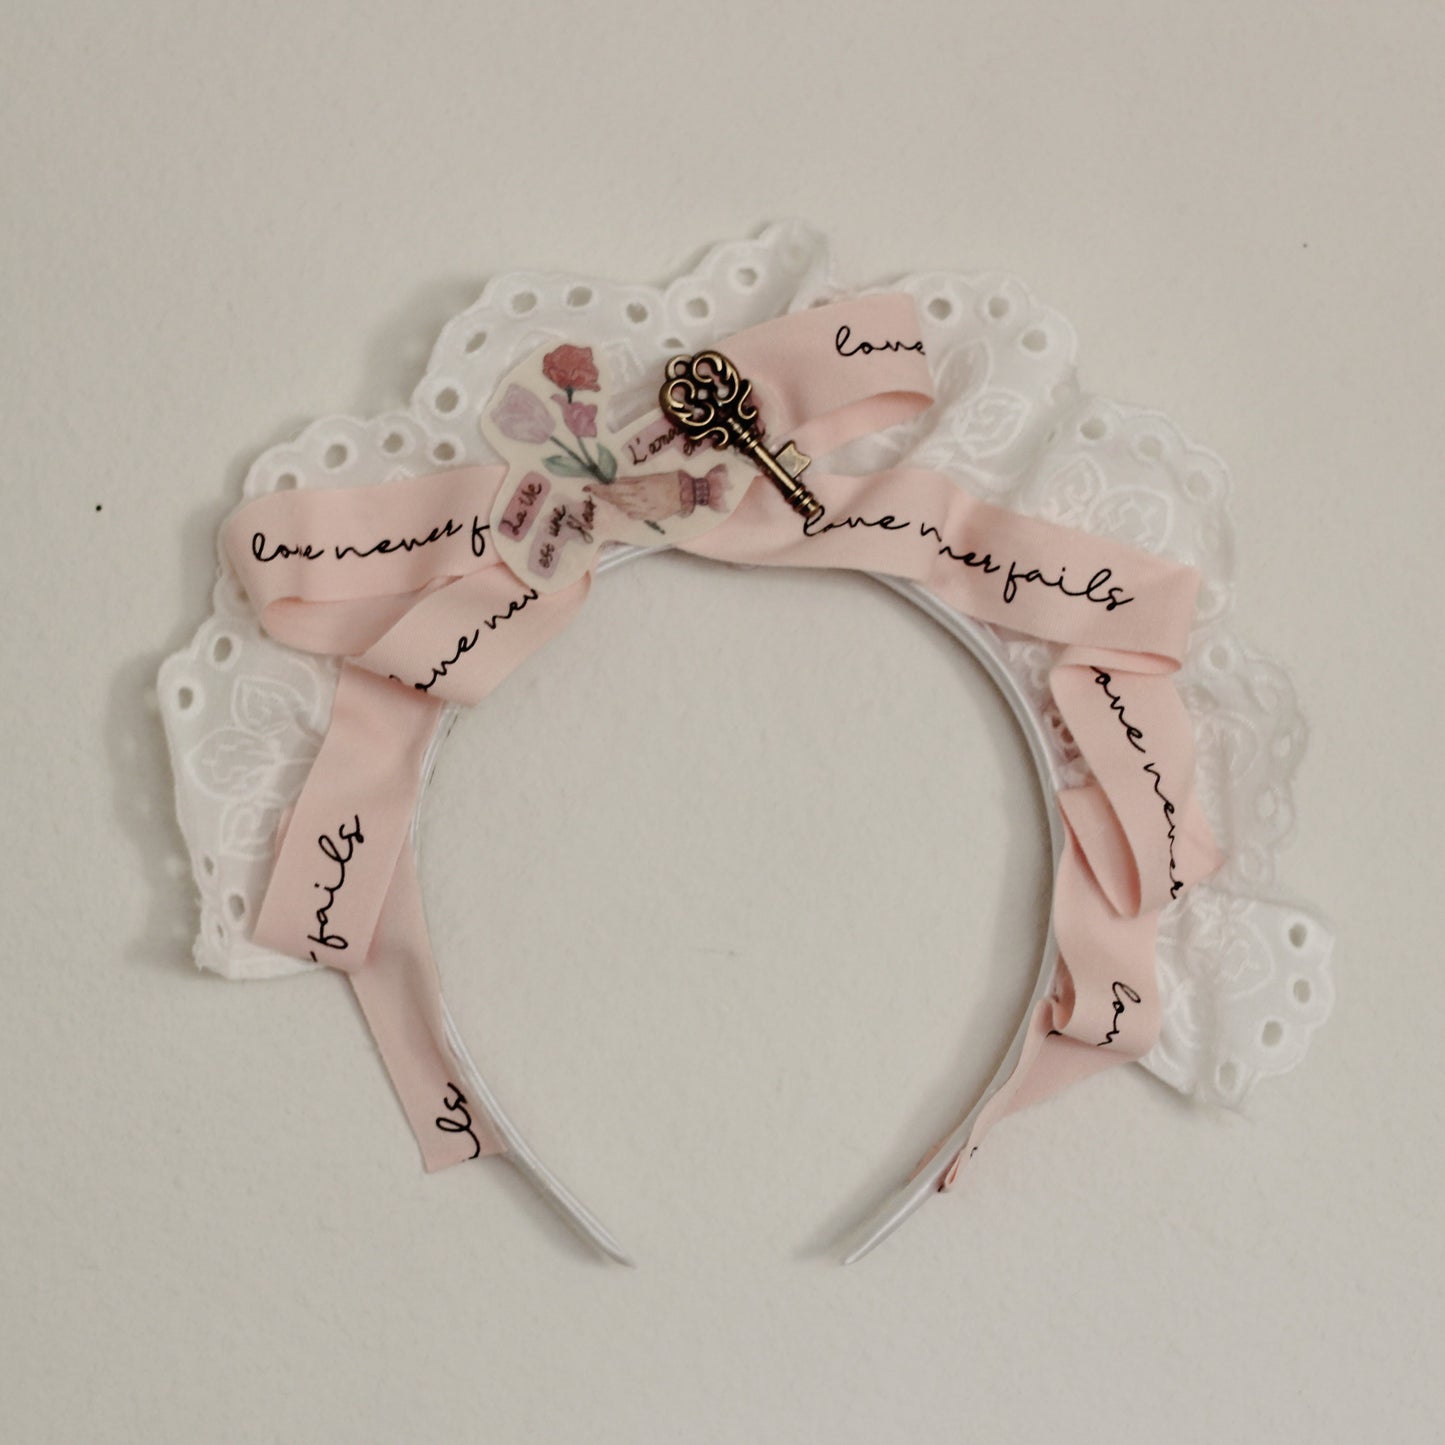 The French Poetry Collection Handmade KC, Hair Accessory